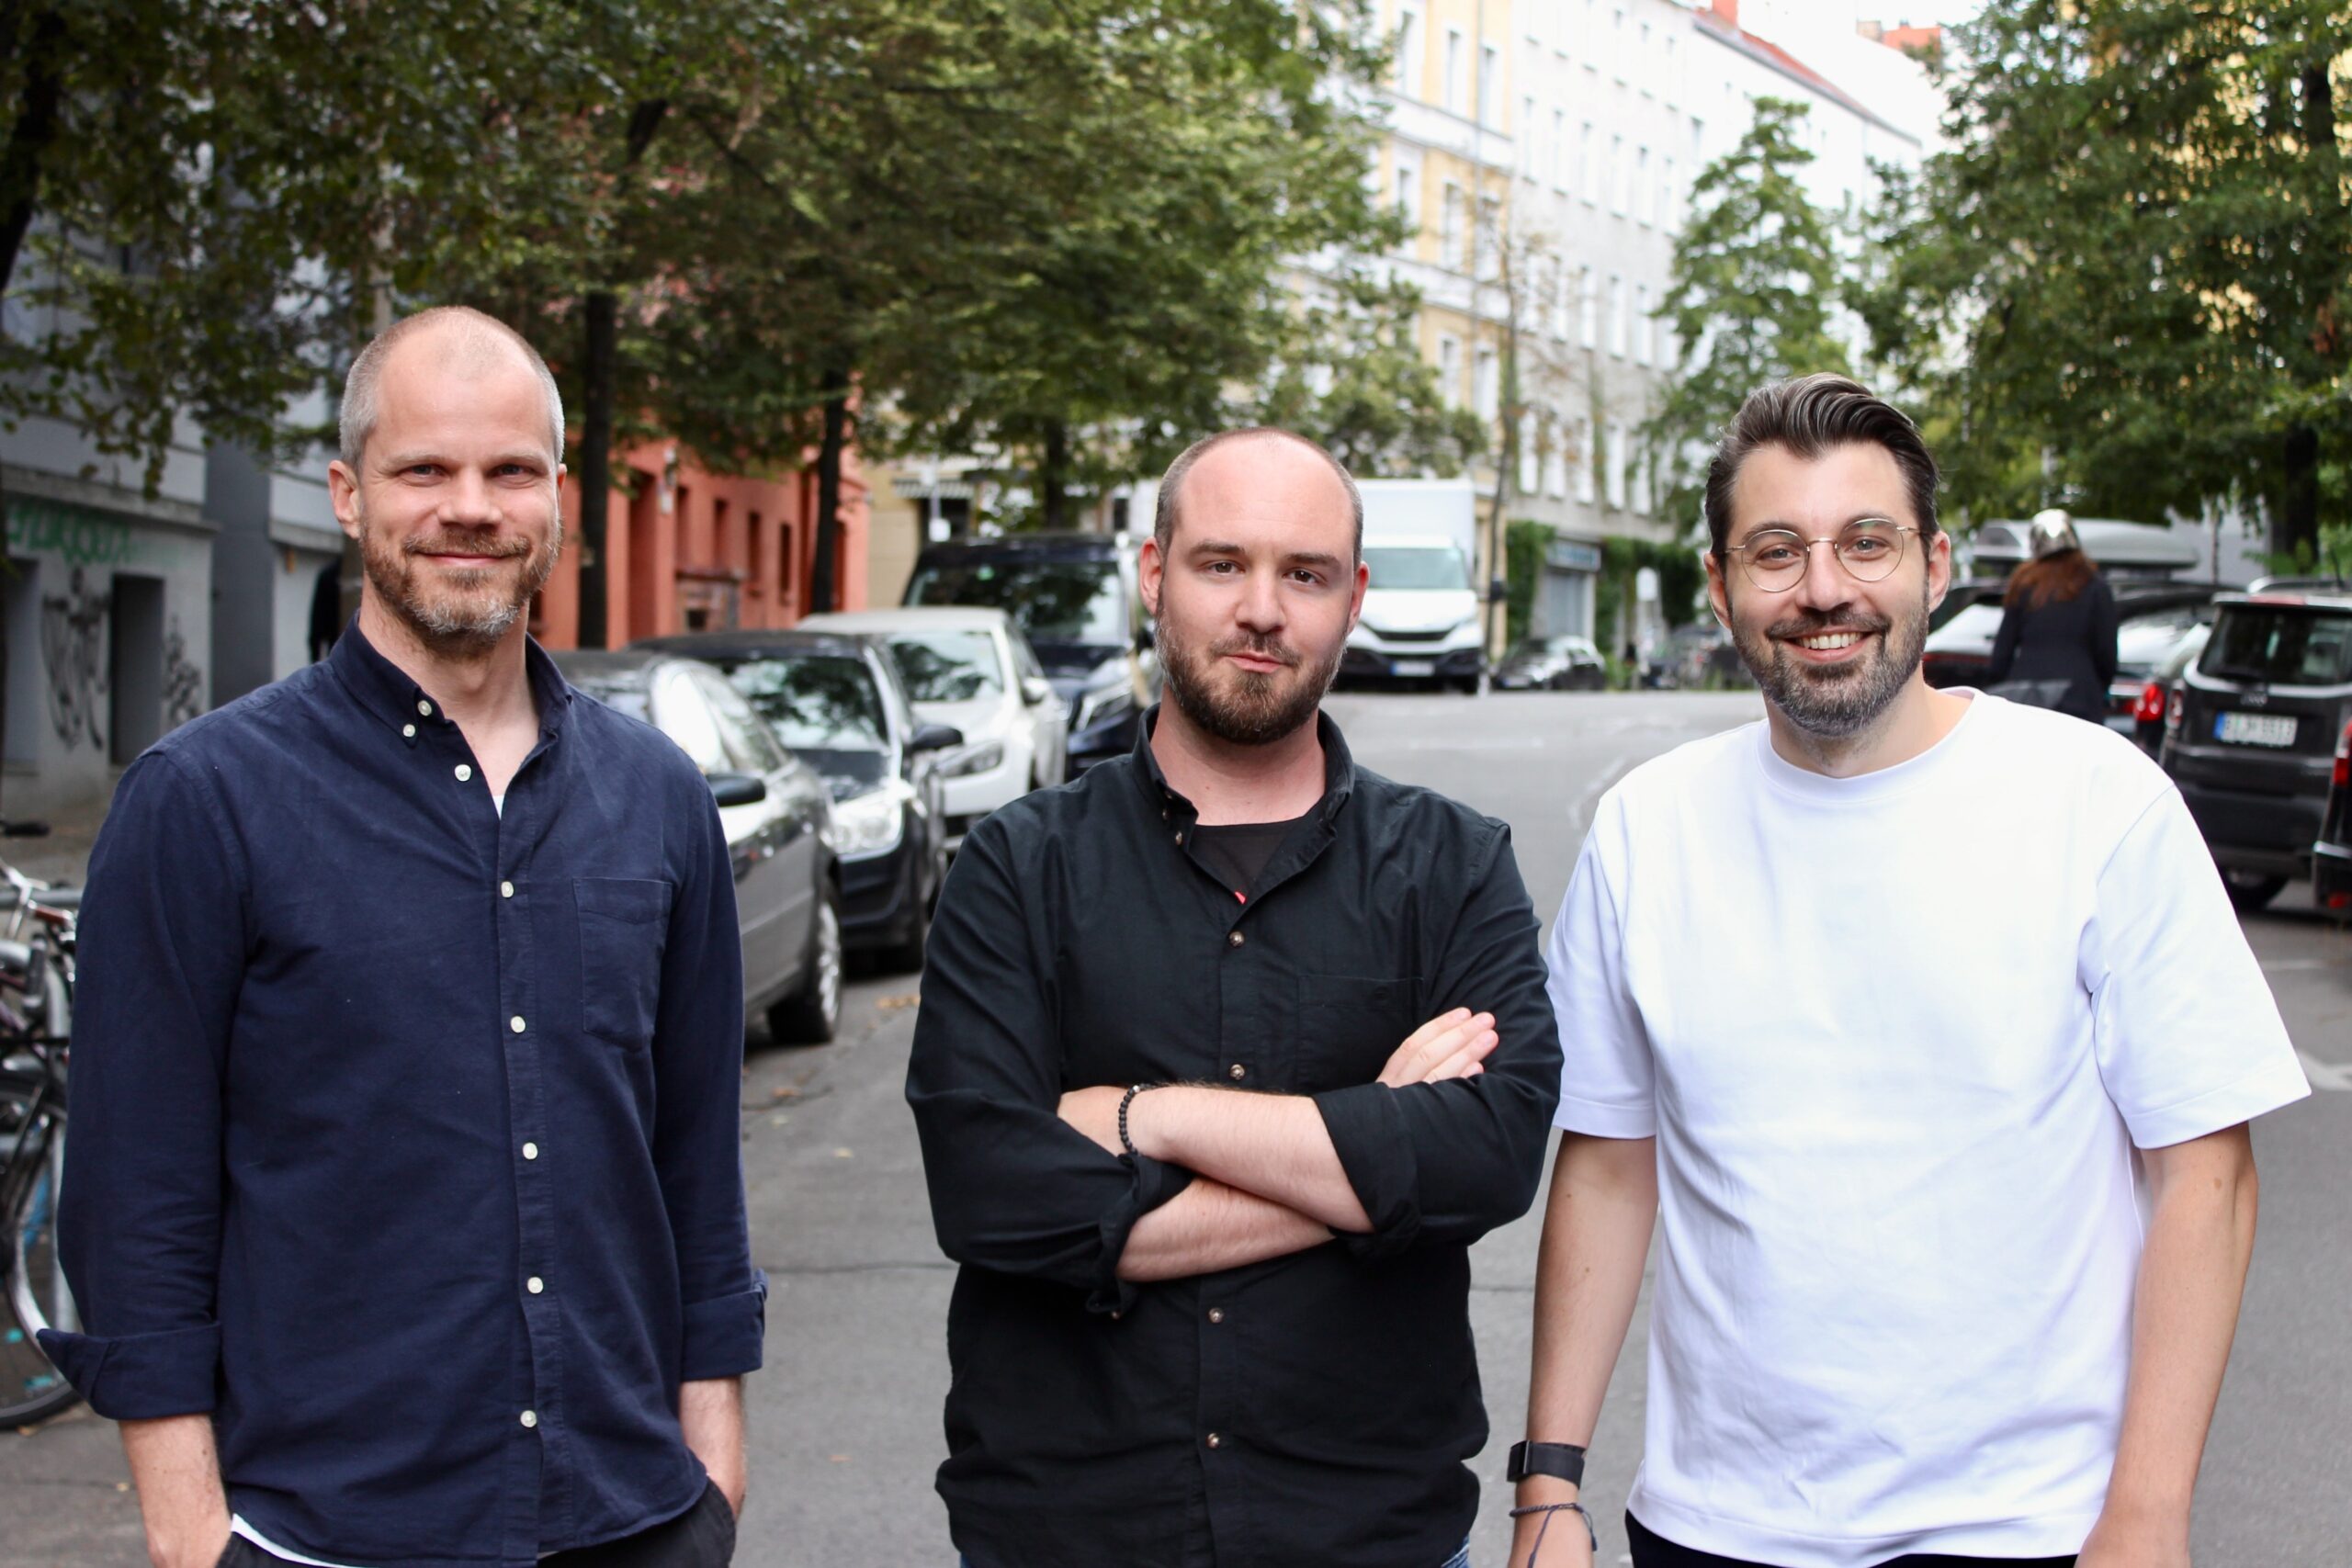 This Berlin-based startup's disruptive approach to SMB insurance